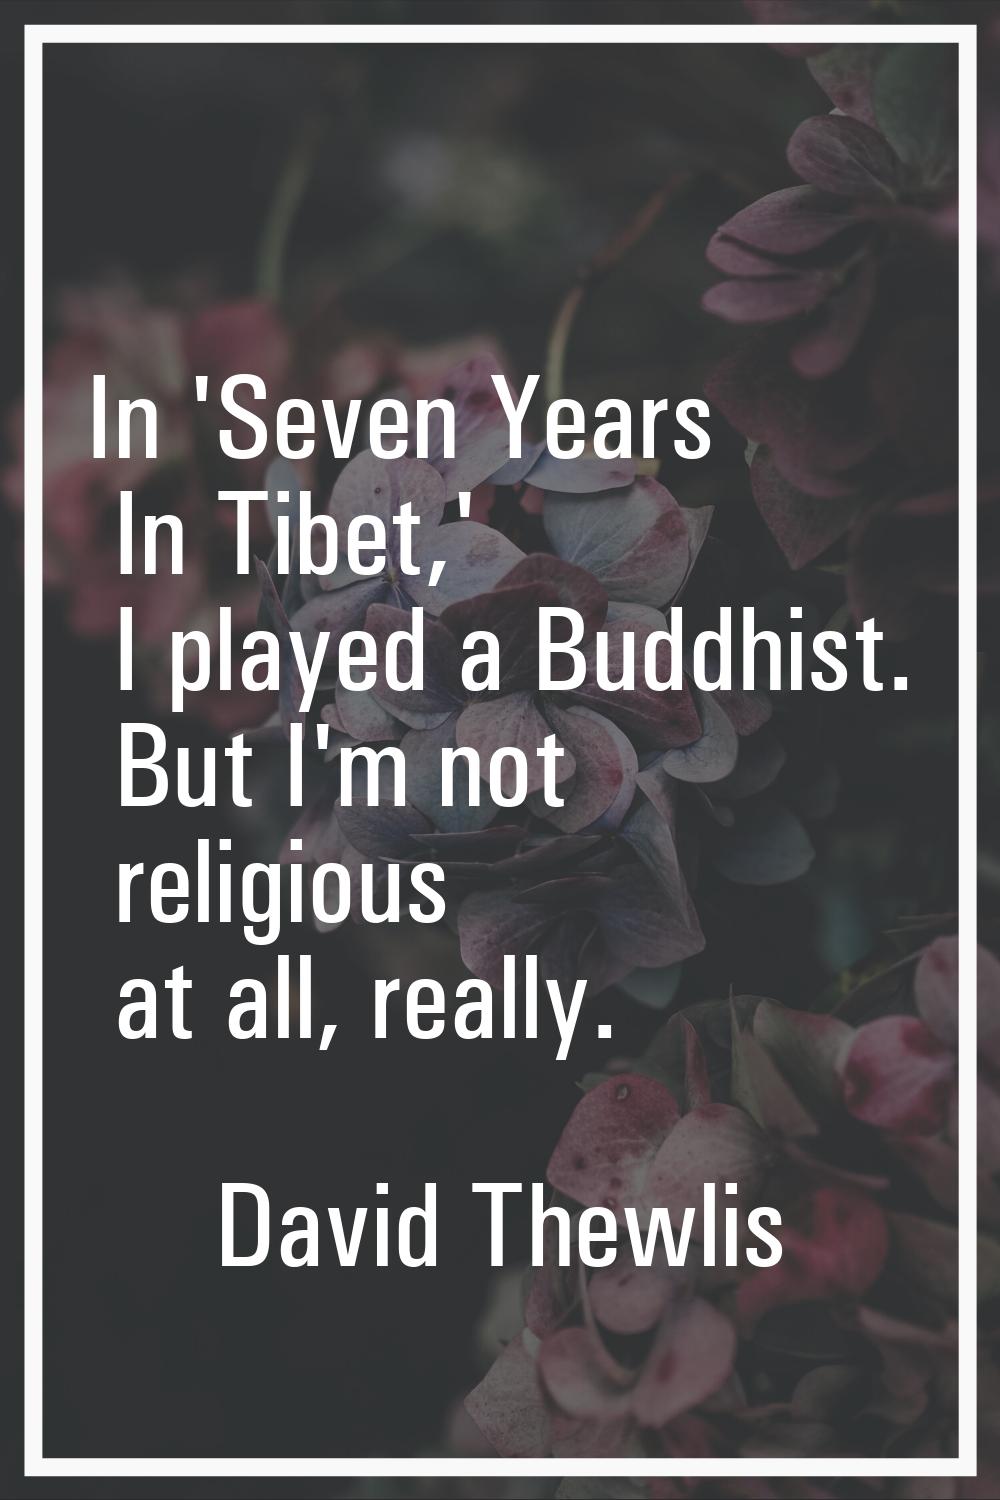 In 'Seven Years In Tibet,' I played a Buddhist. But I'm not religious at all, really.